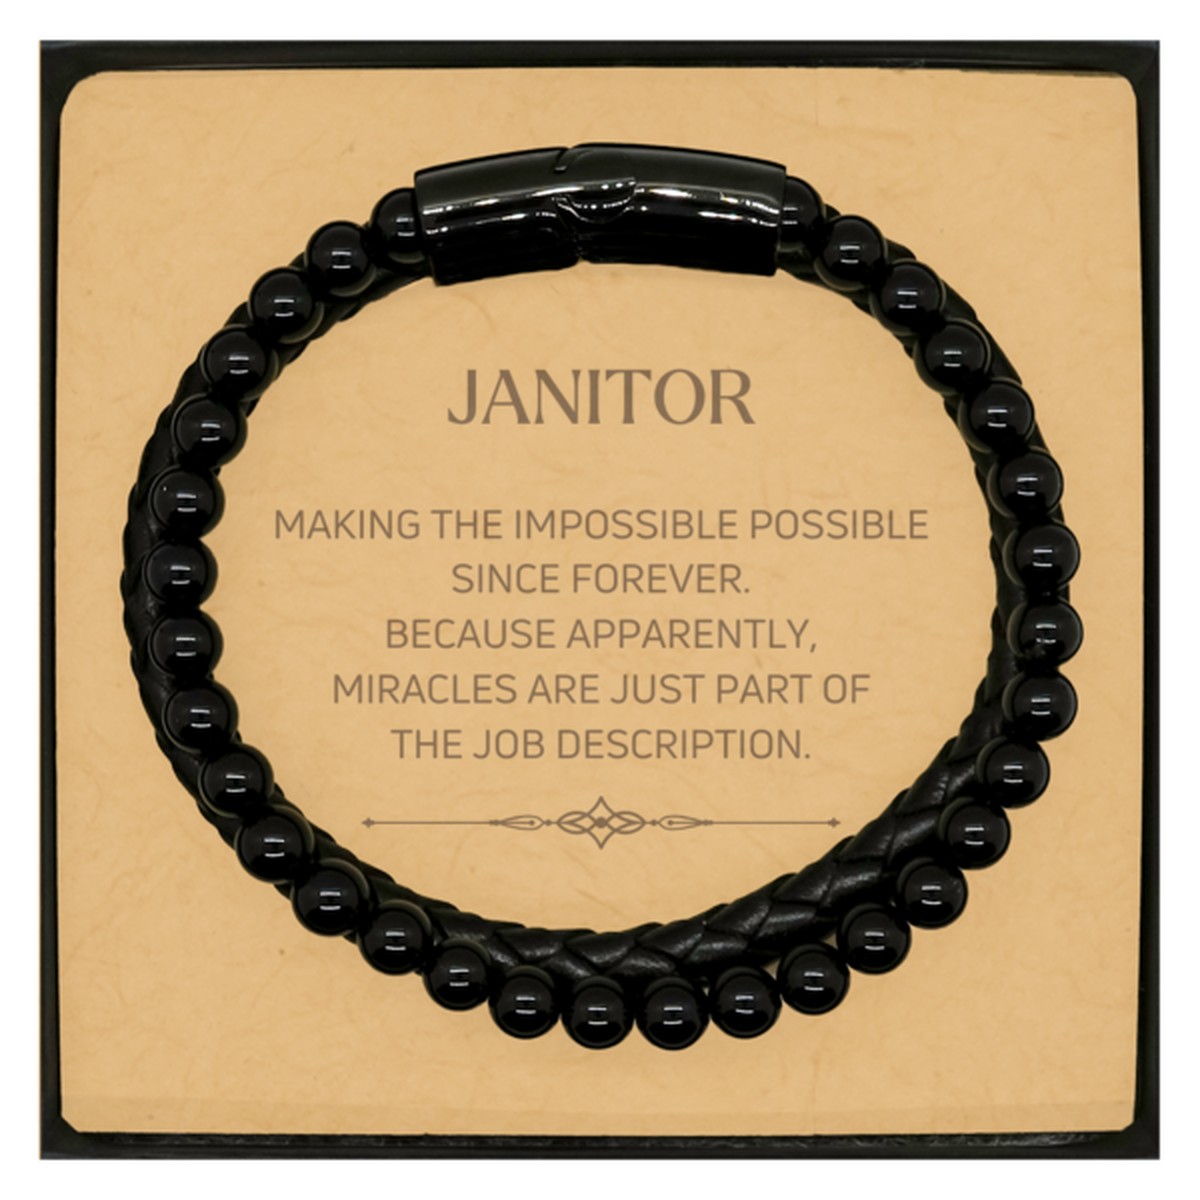 Funny Janitor Gifts, Miracles are just part of the job description, Inspirational Birthday Christmas Stone Leather Bracelets For Janitor, Men, Women, Coworkers, Friends, Boss